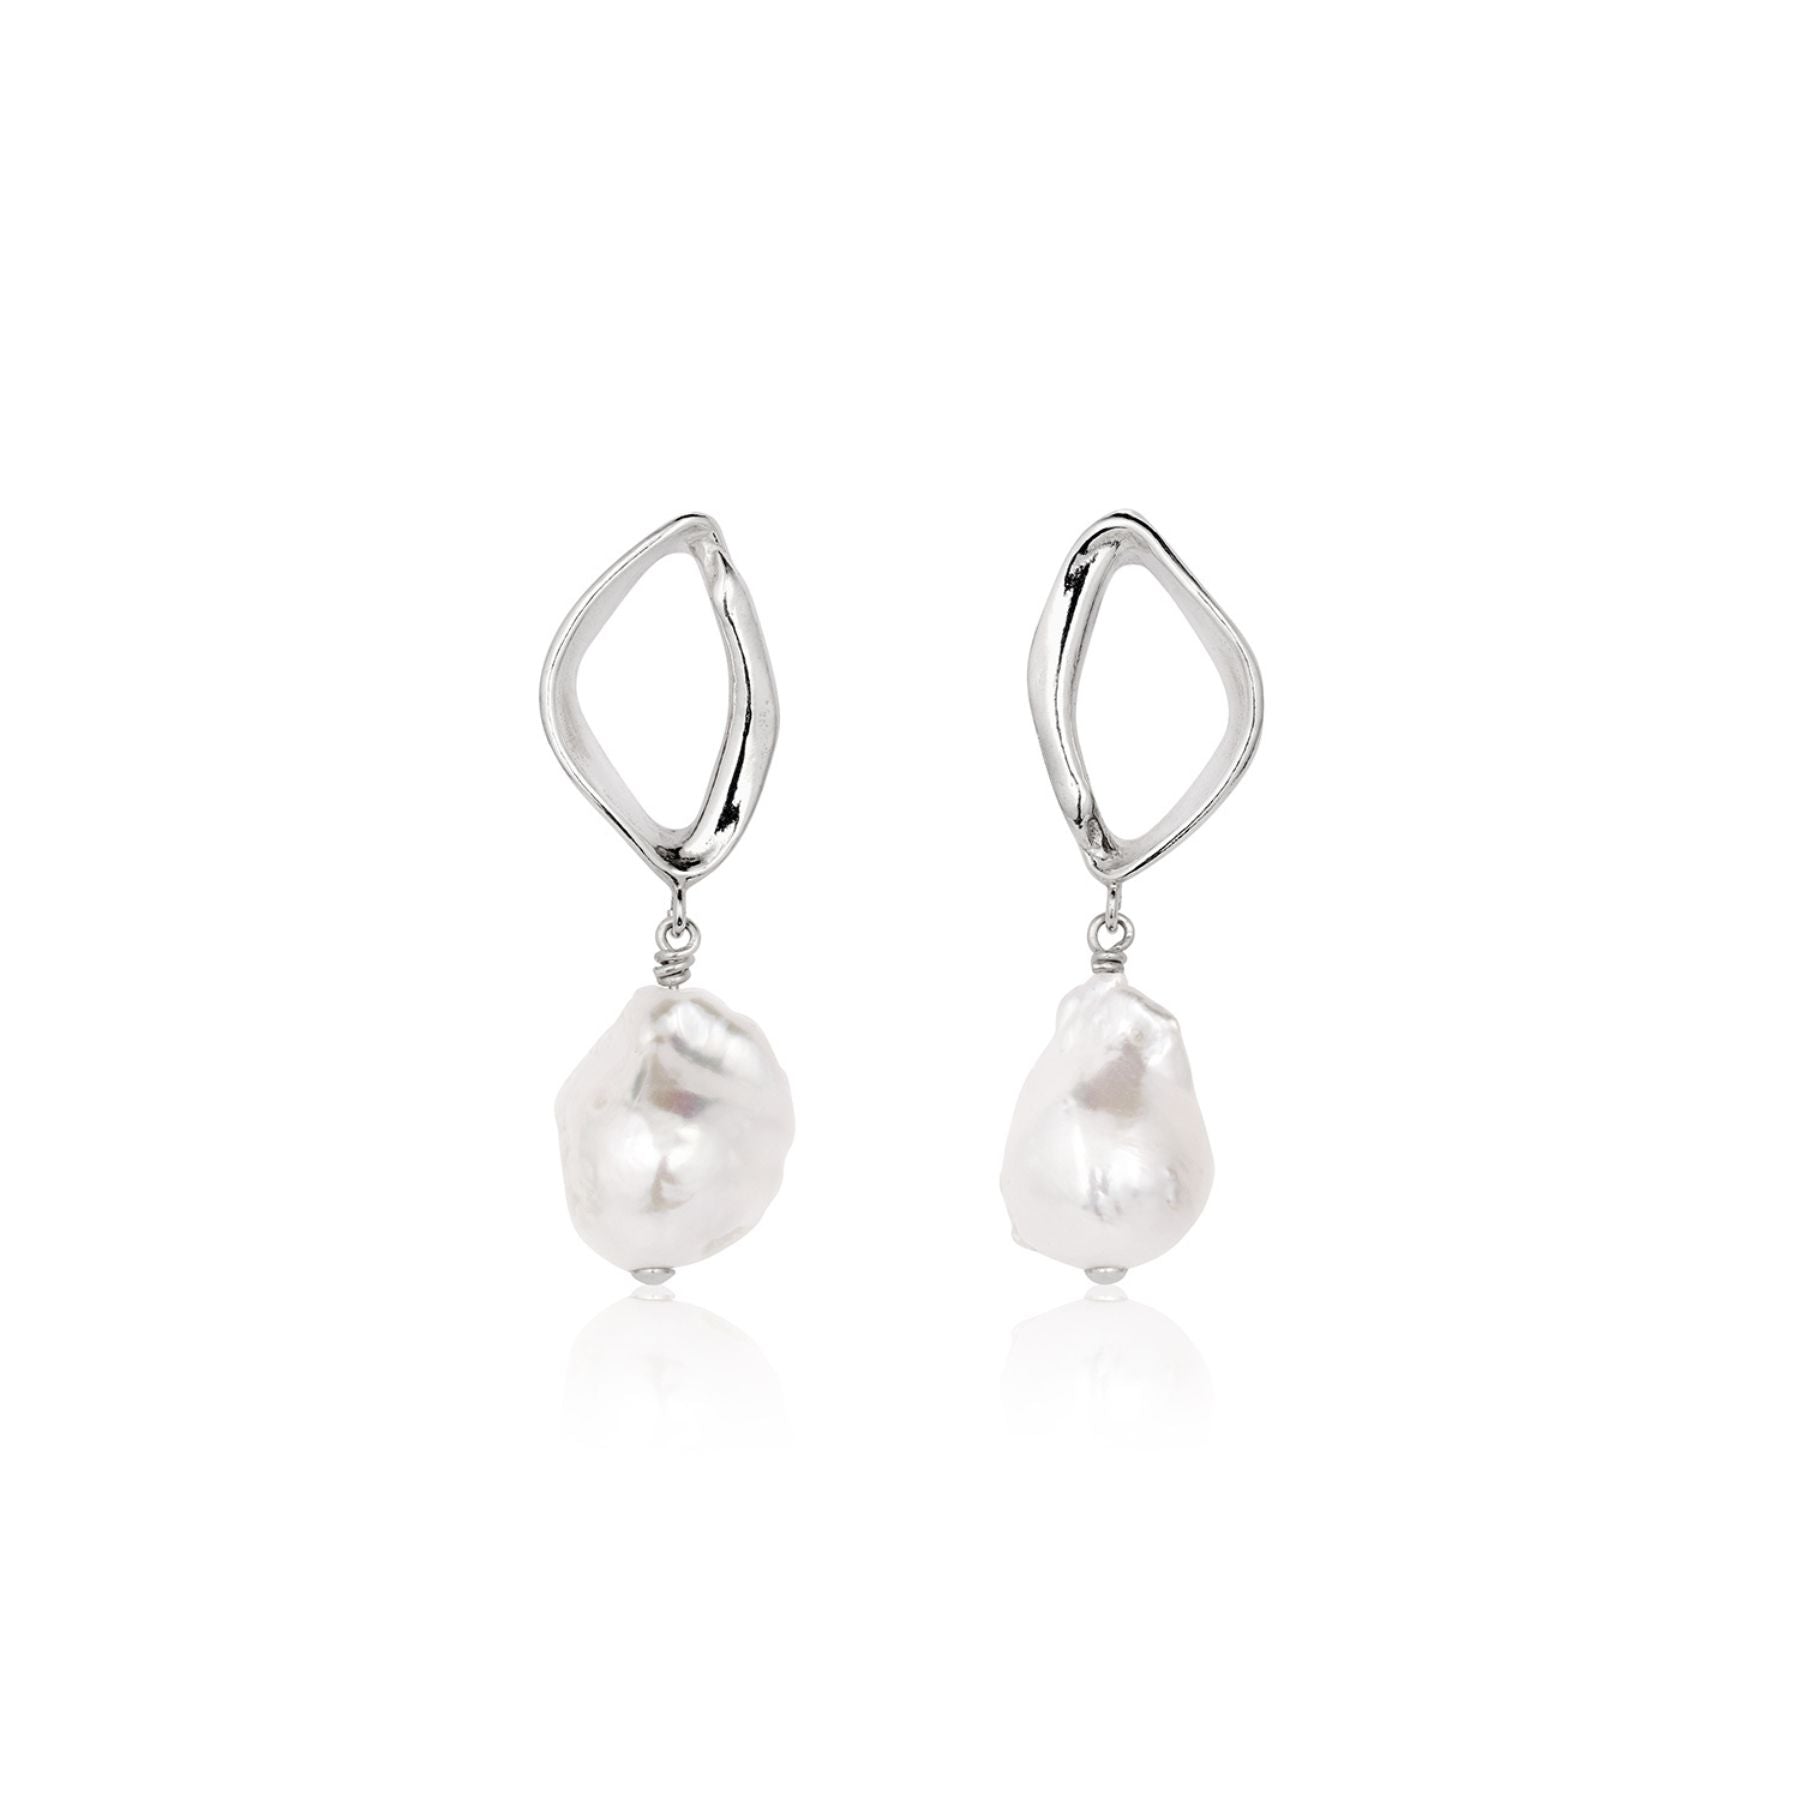 Abstract earrings in sterling silver with a baroque pearl drop.